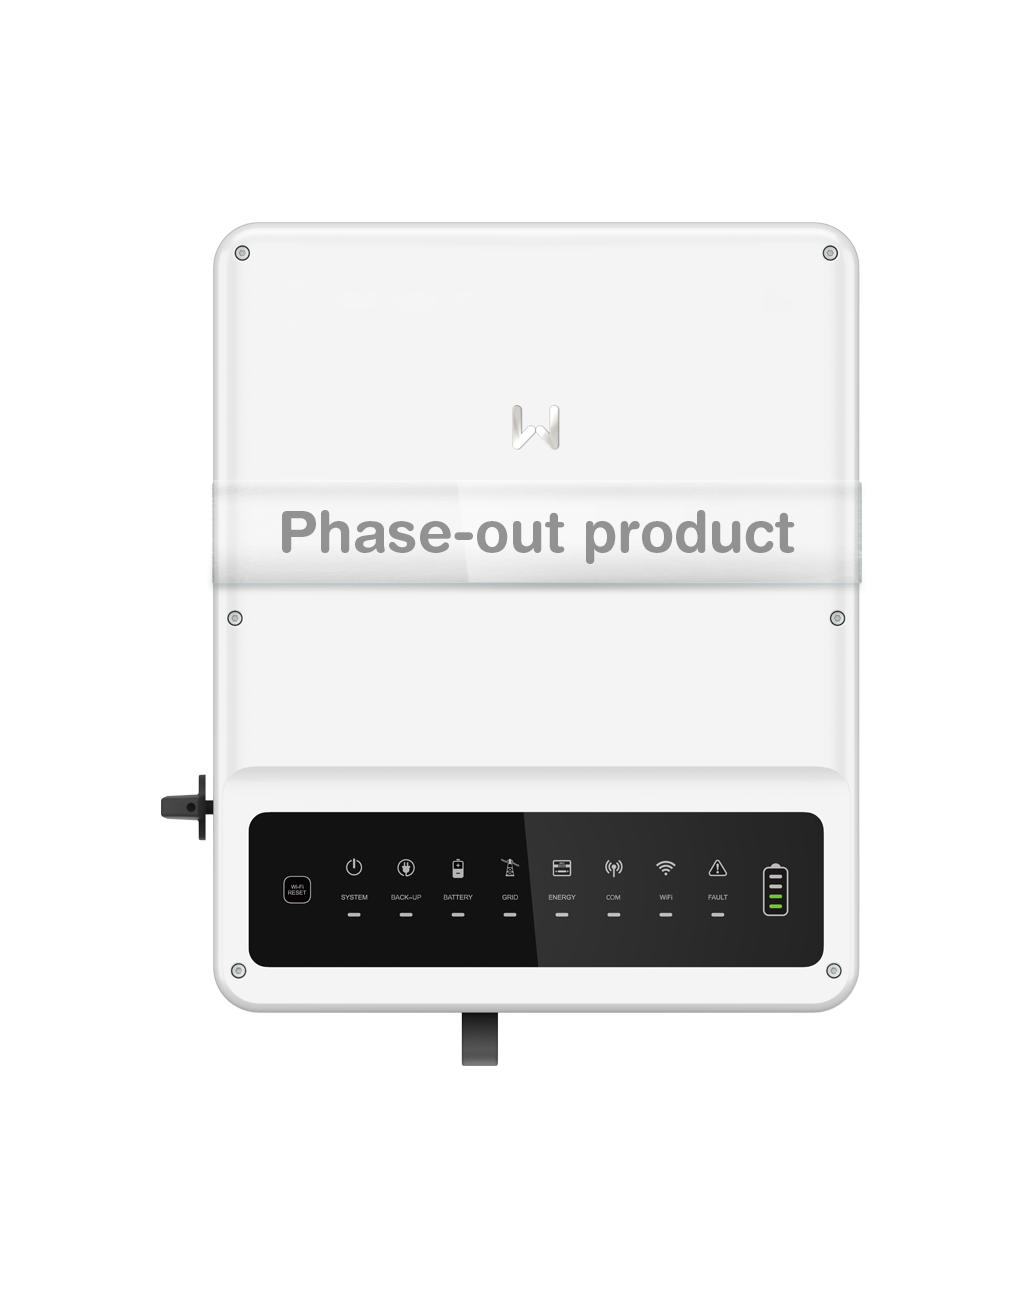 EH(Phase-outproduct).png